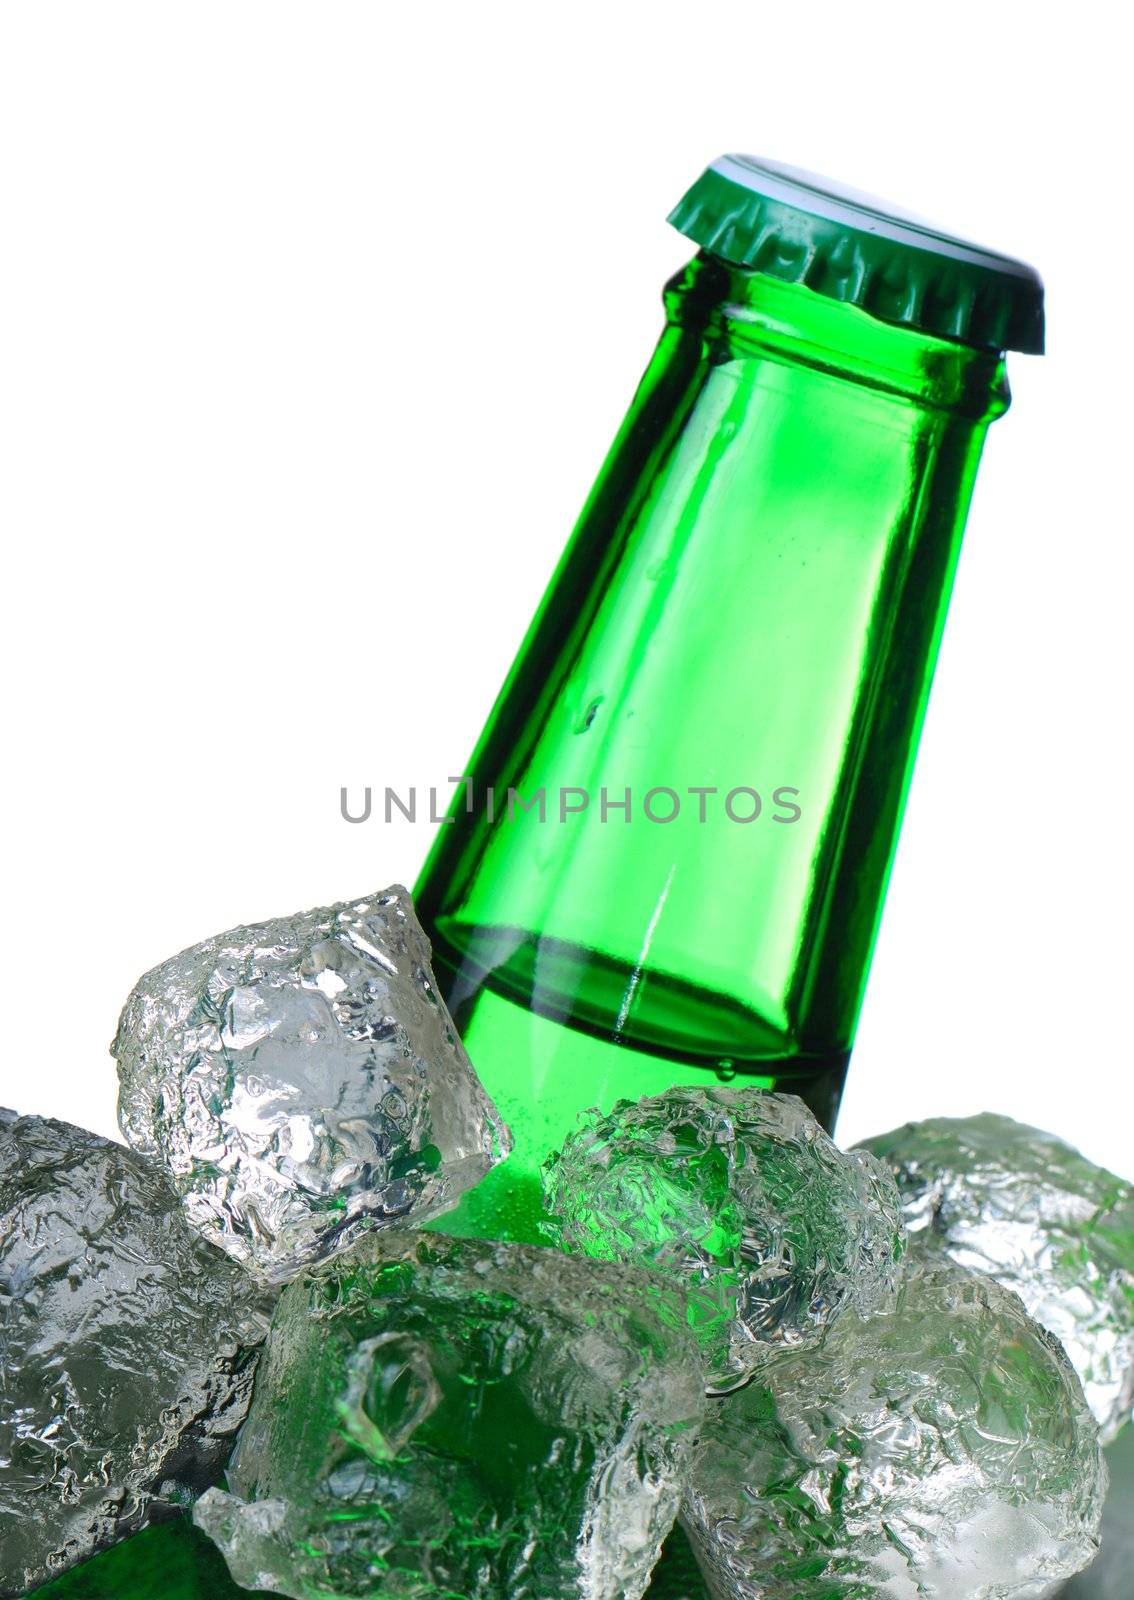 Green beer bottle in ice isolated on white